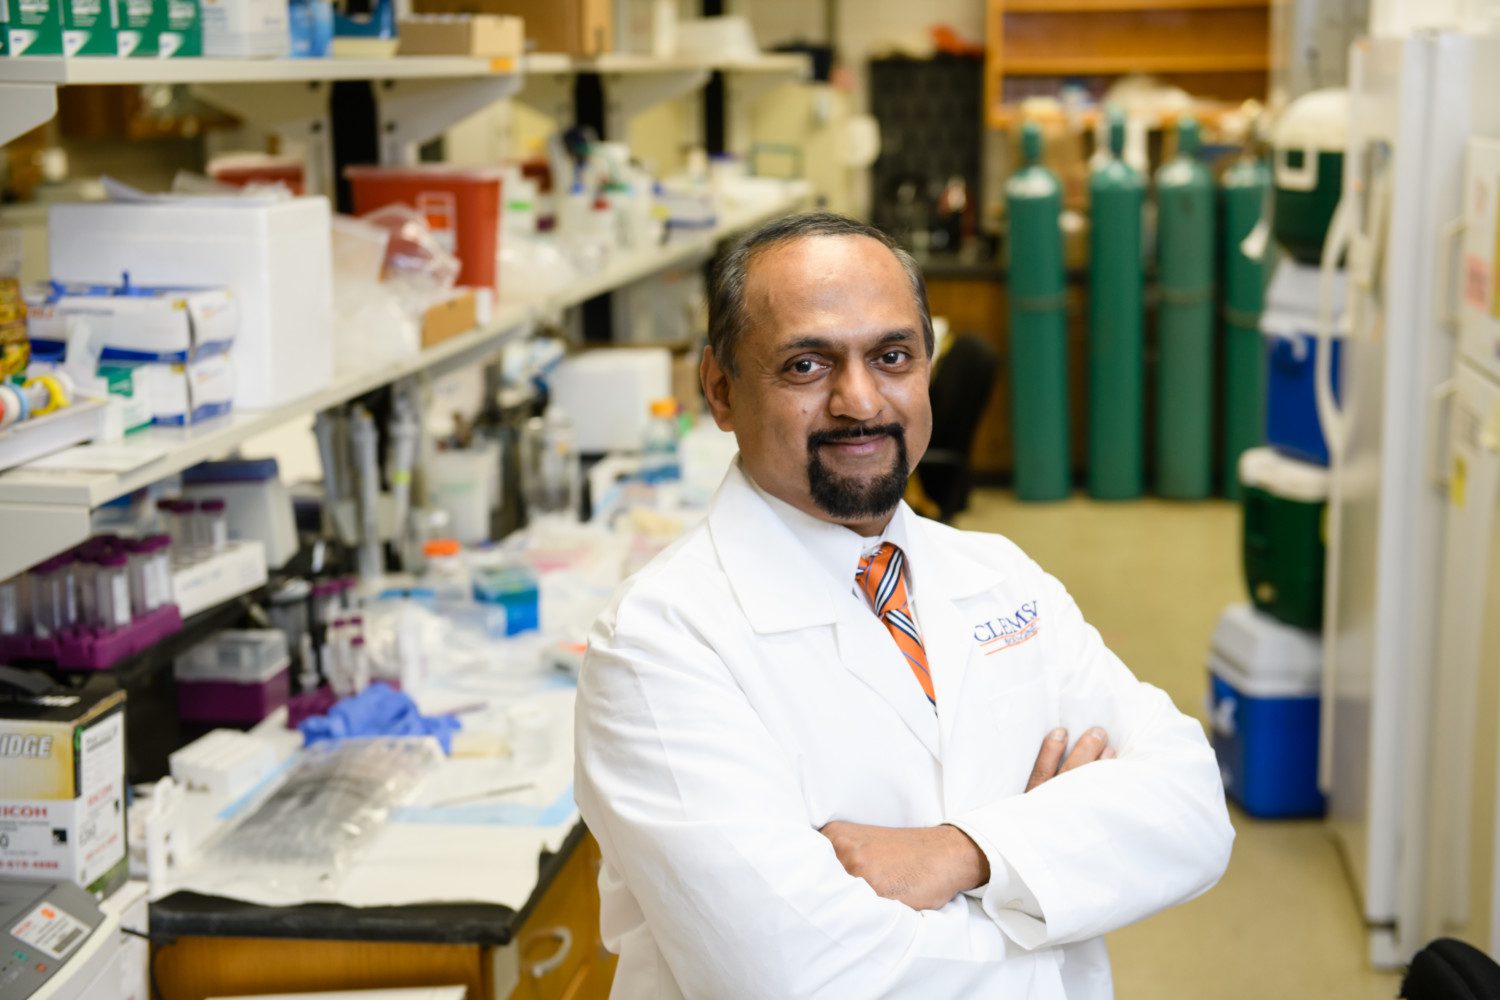 Naren Vyavahare, the Hunter Endowed Chair of Bioengineering at Clemson University, is the principal investigator of the grant that created the the South Carolina Bioengineering Center for Regeneration and Formation of Tissues.